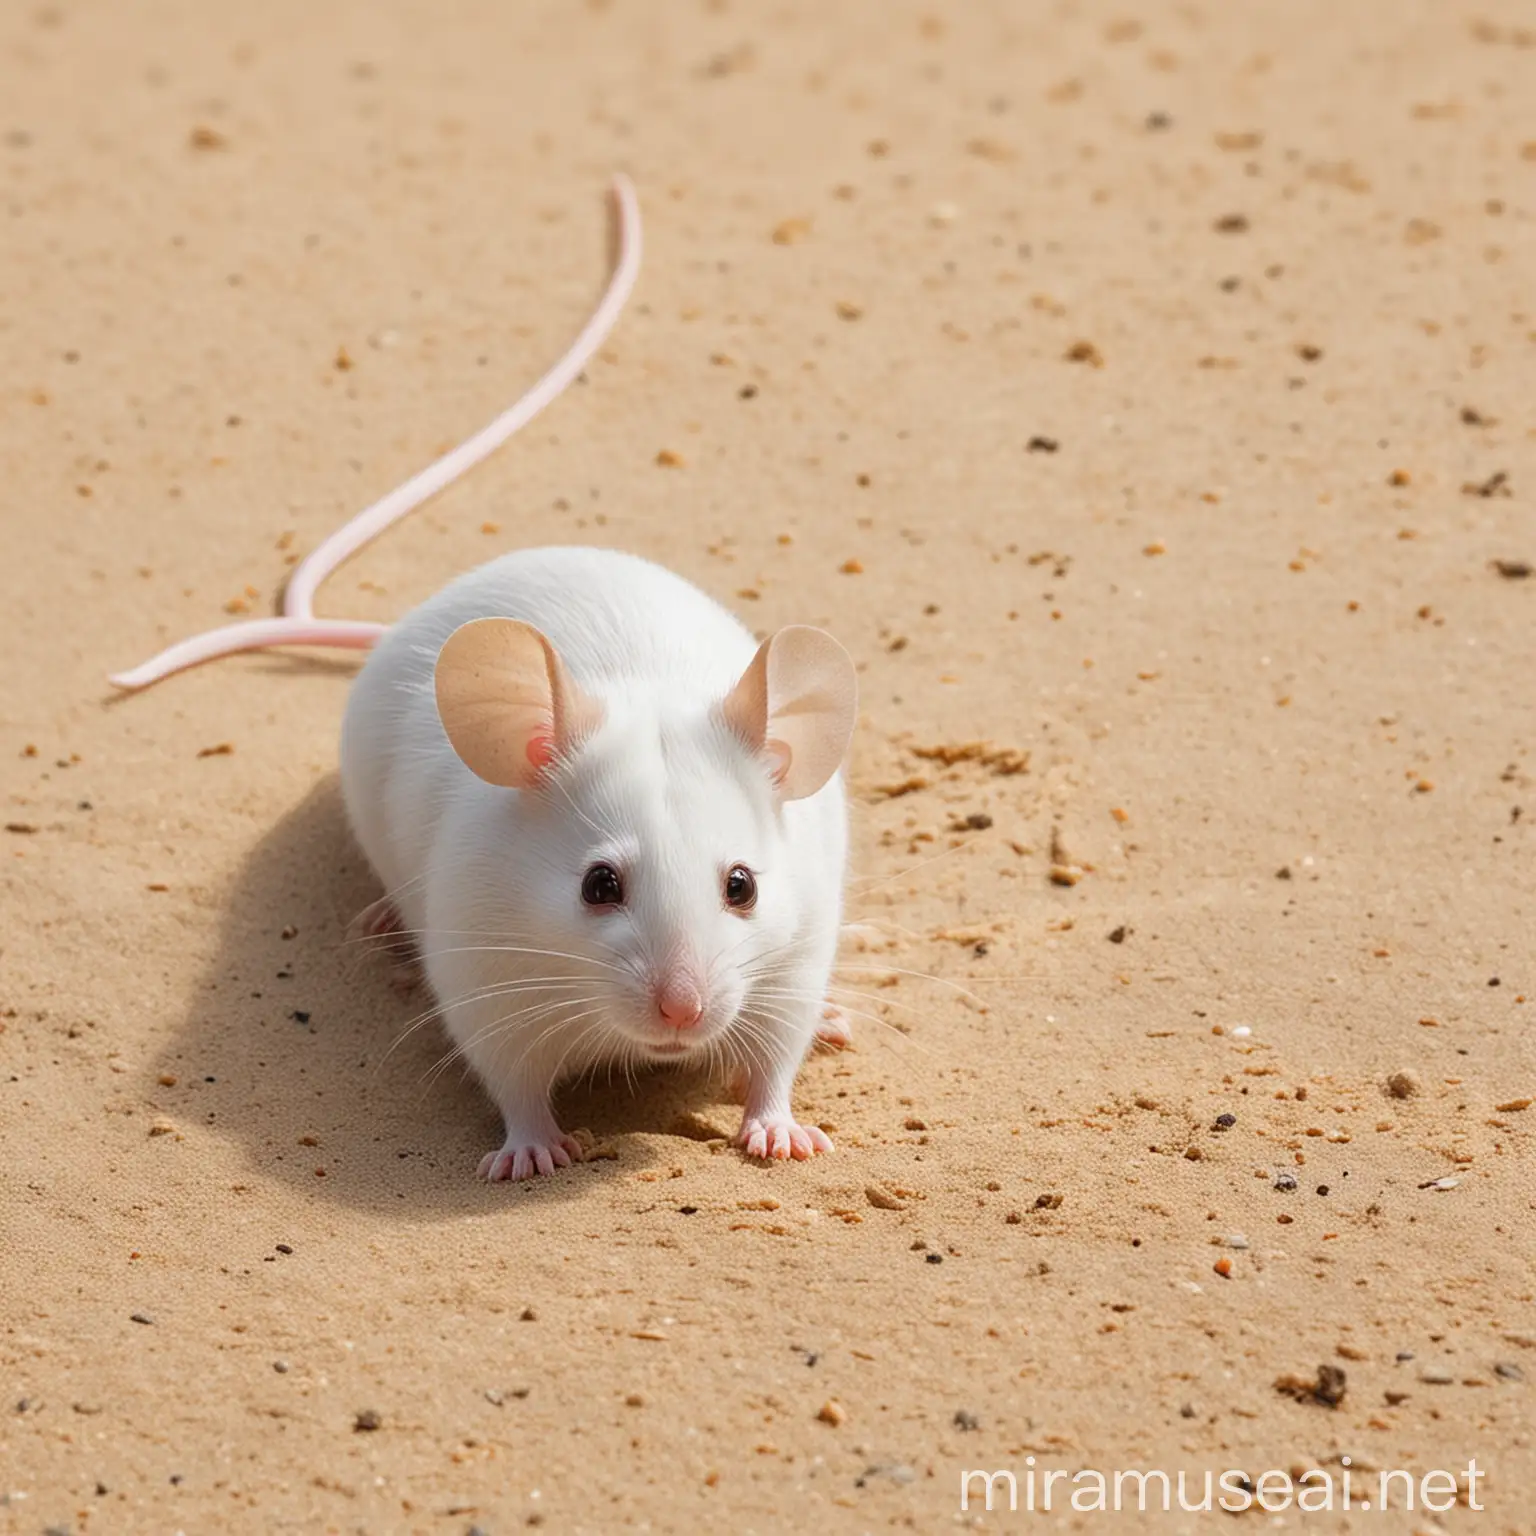 Energetic White Mouse with Single Tail Scampering on Sandy Surface